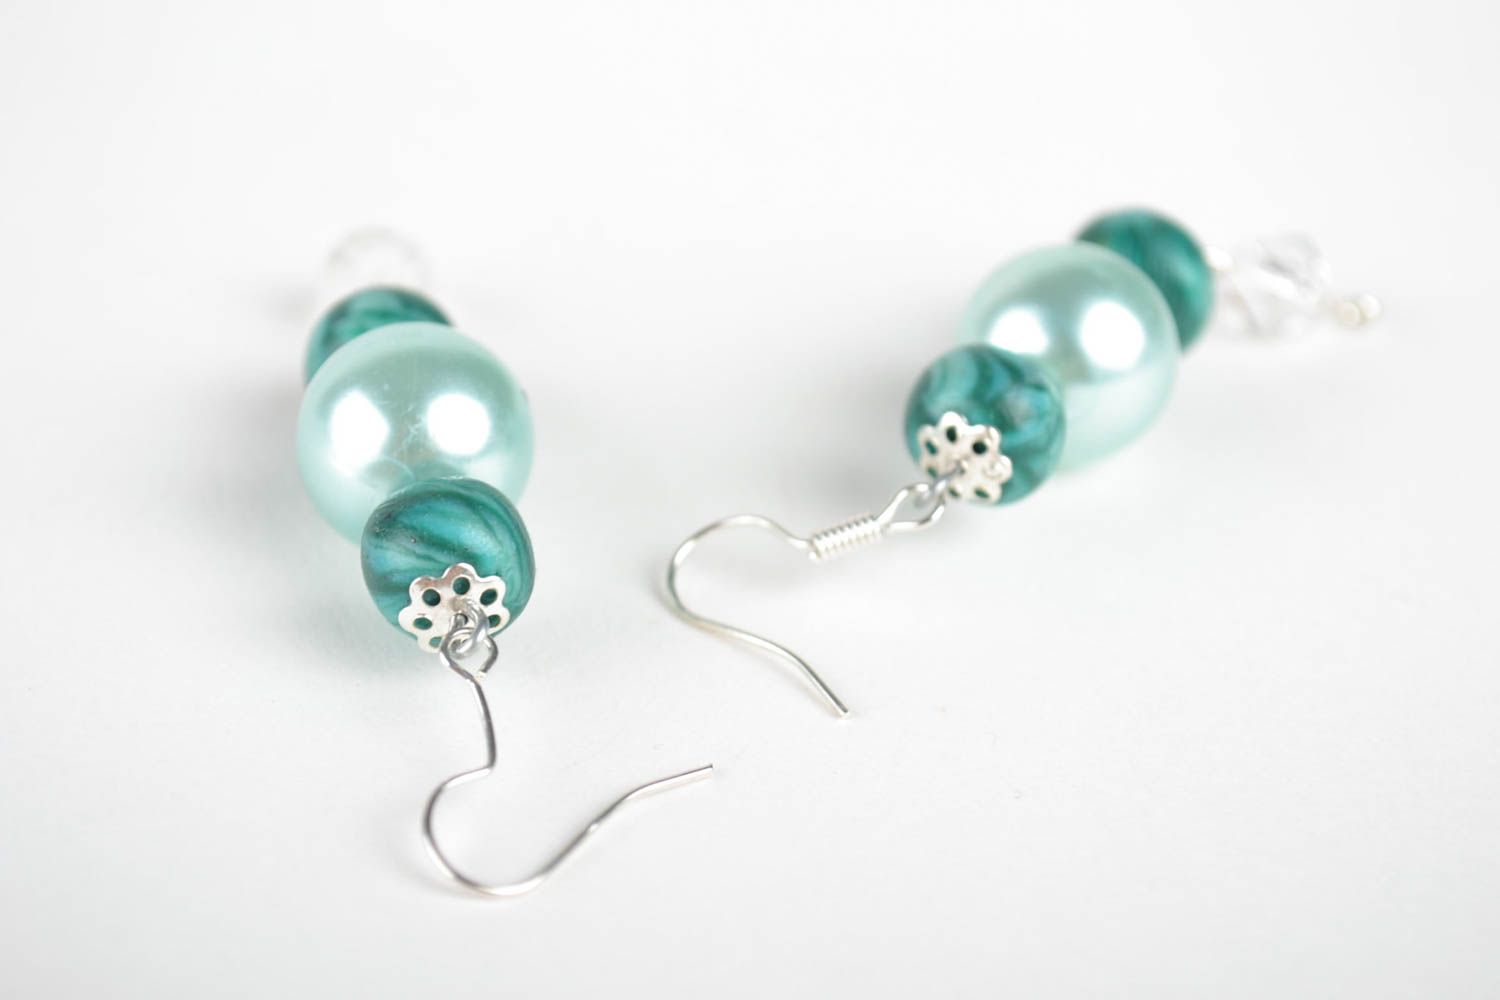 Bead earrings homemade jewelry dangling earrings polymer clay gifts for girls photo 4